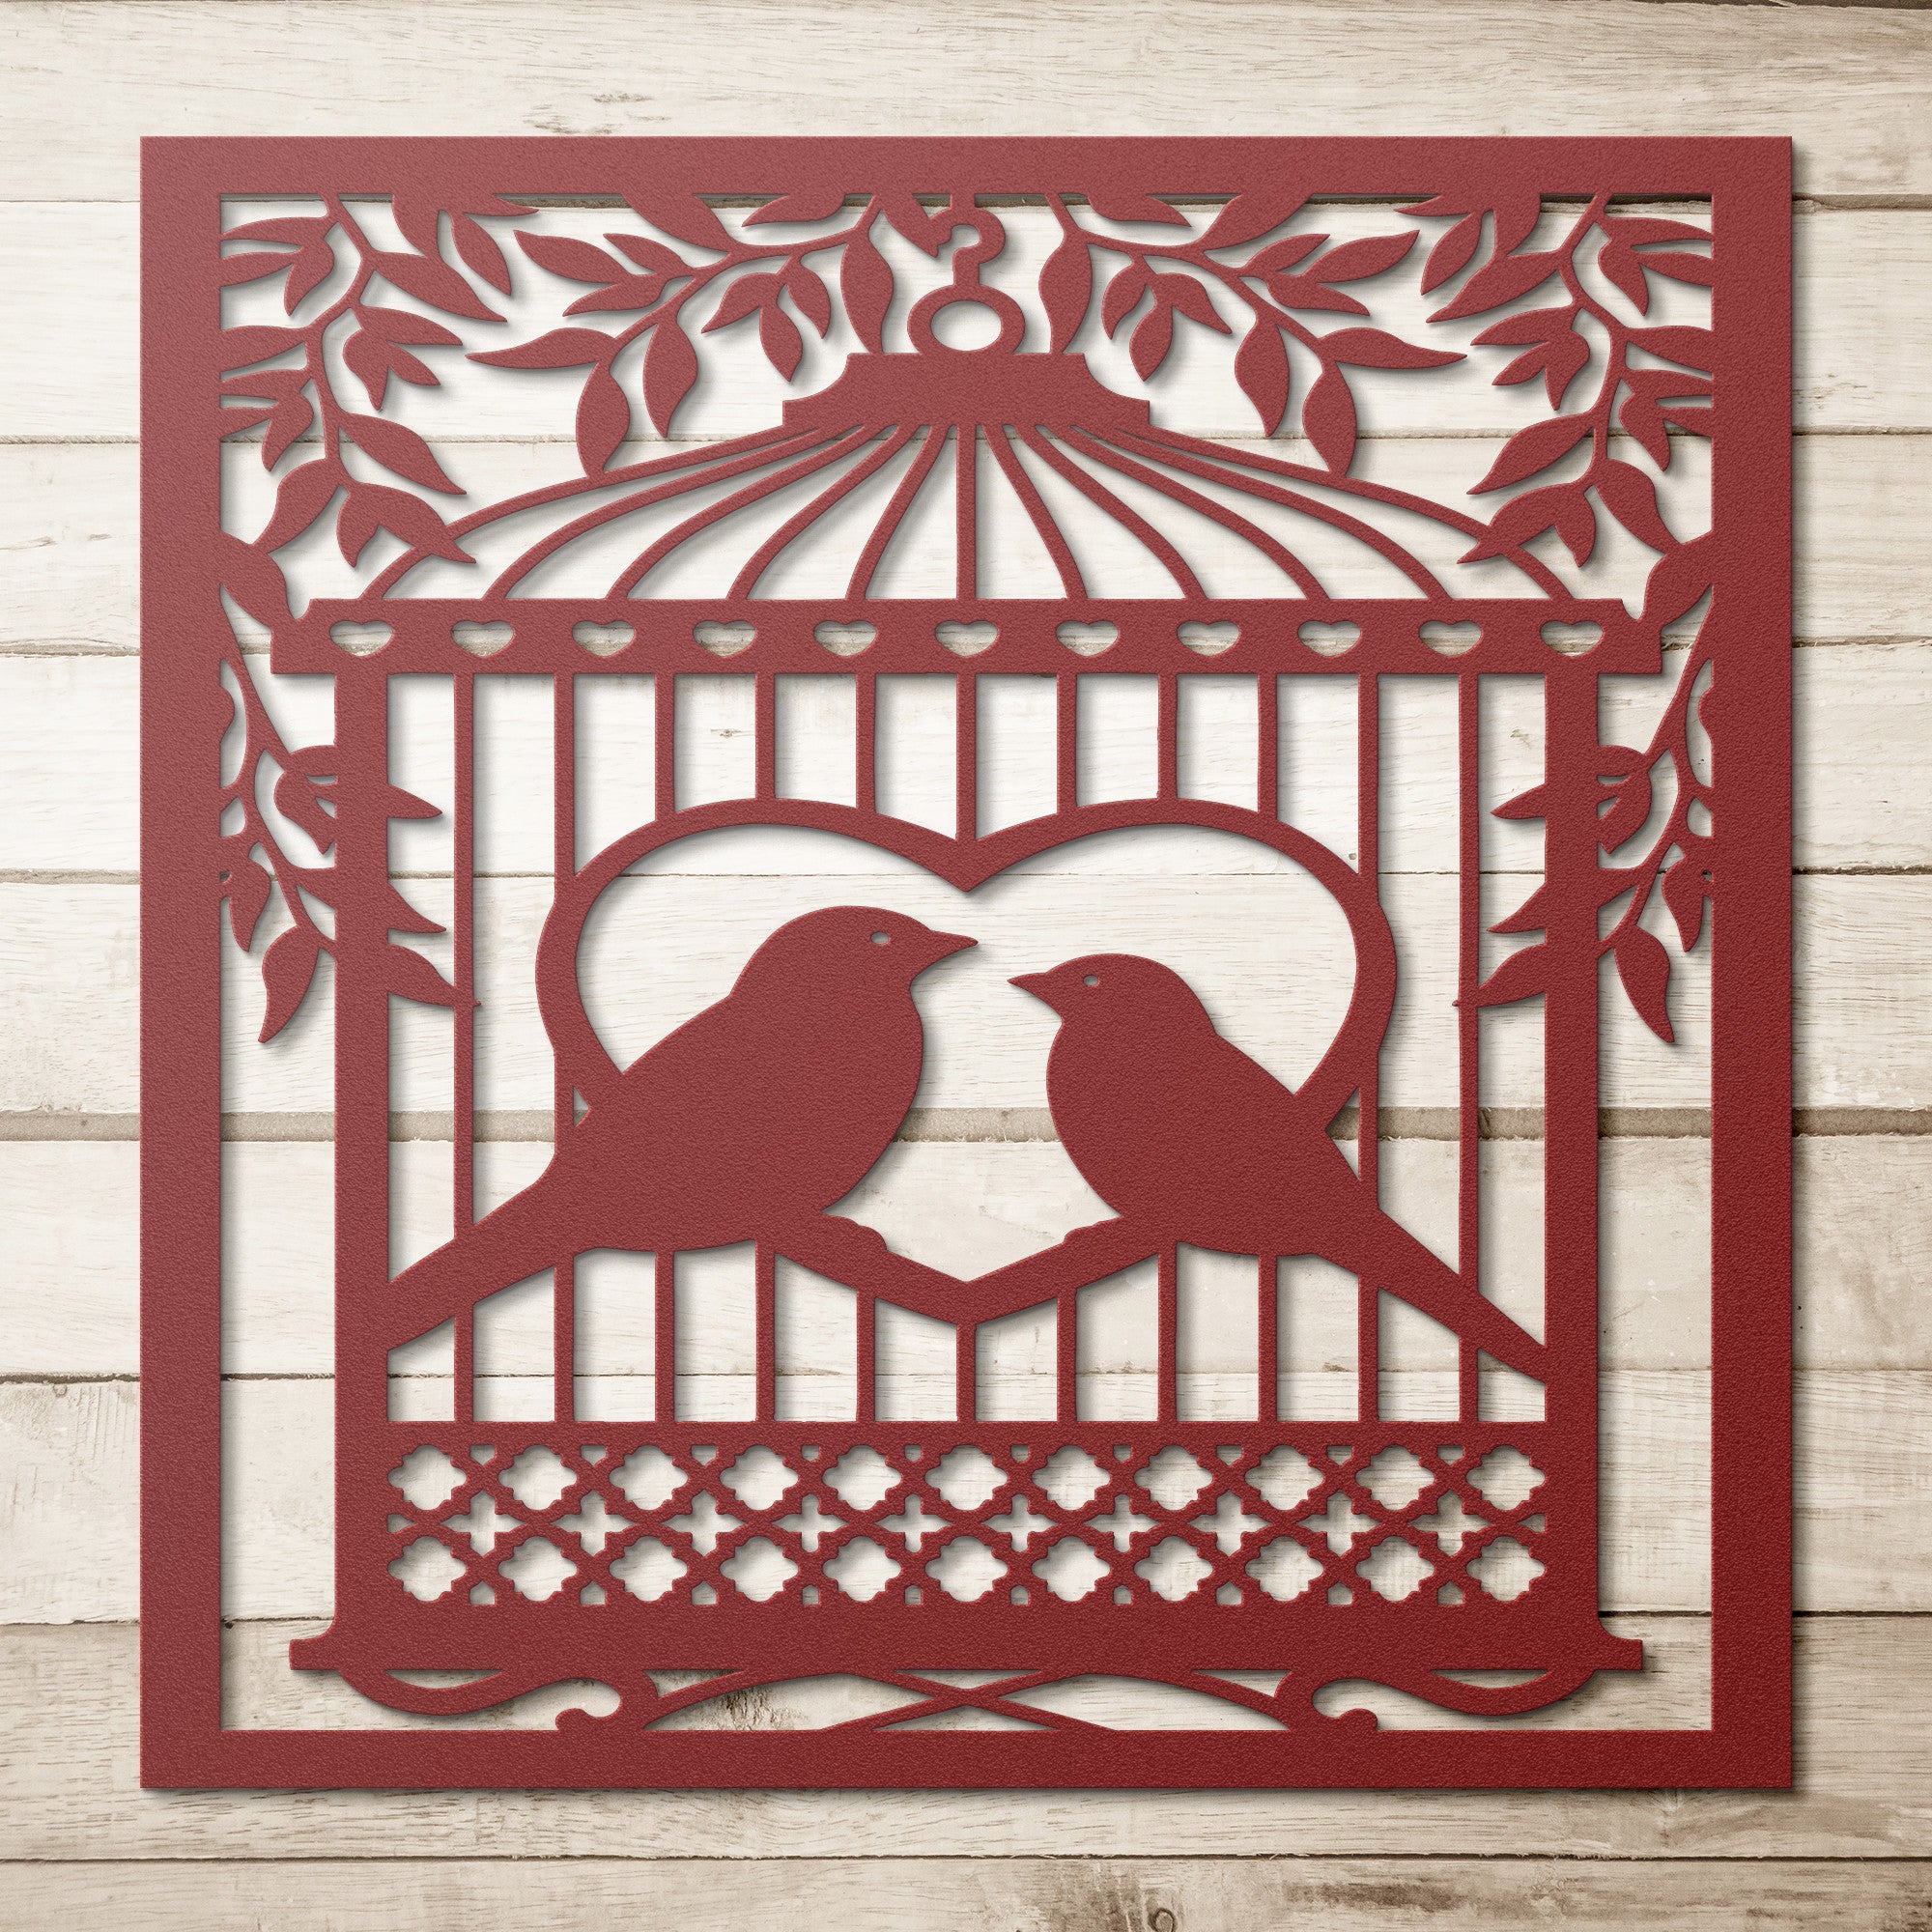 Two Birds in a Cage Sign - Cool Metal Signs